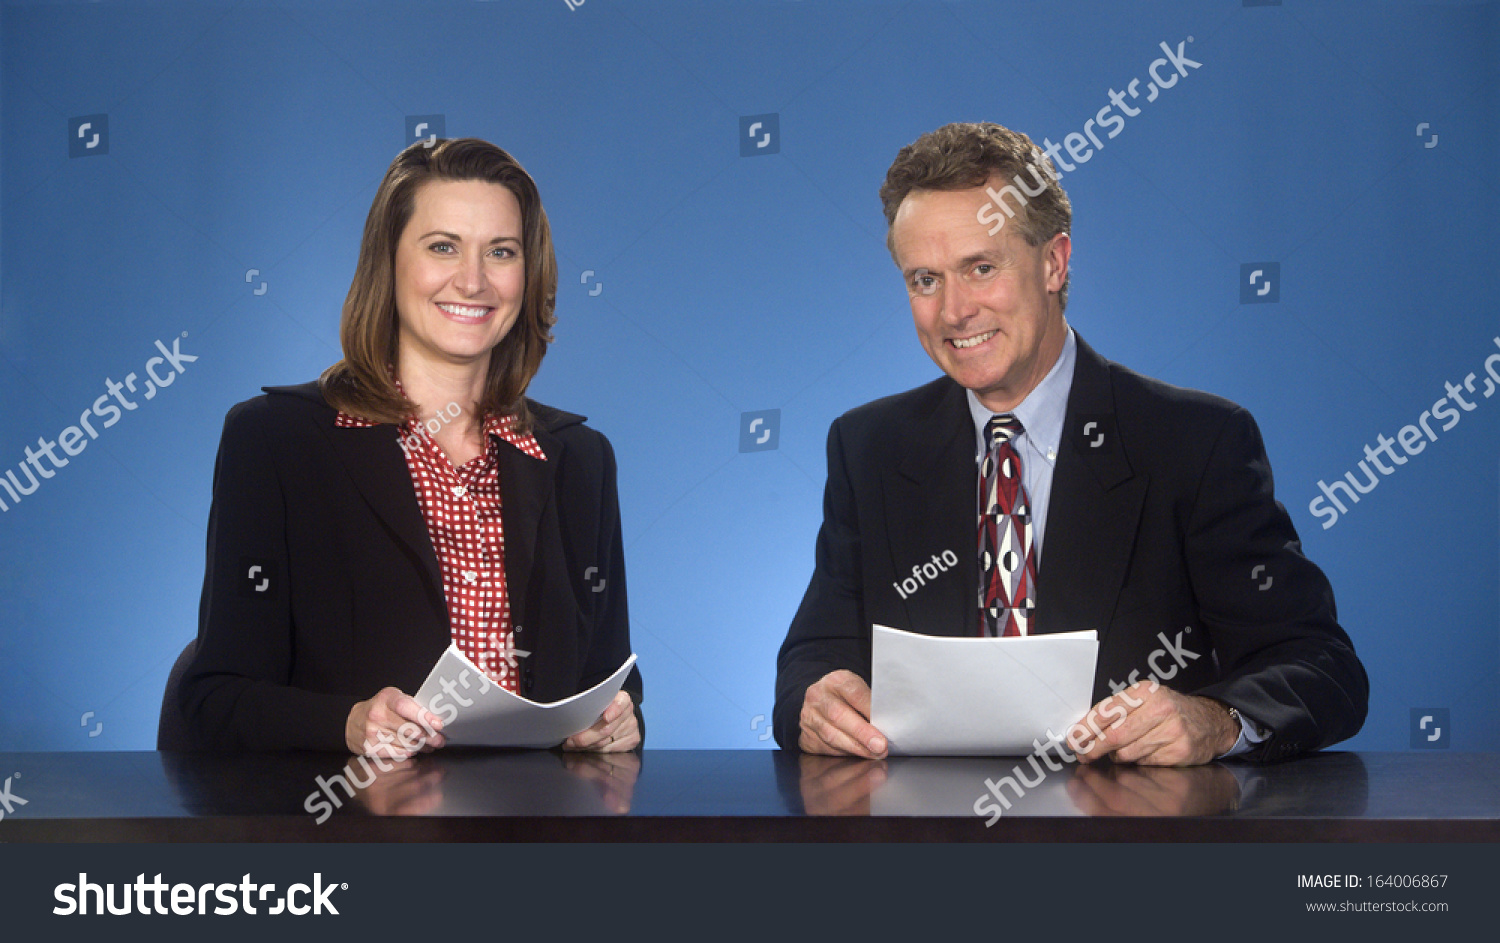 Male and female newscasters sitting at desk smiling at viewer. #164006867